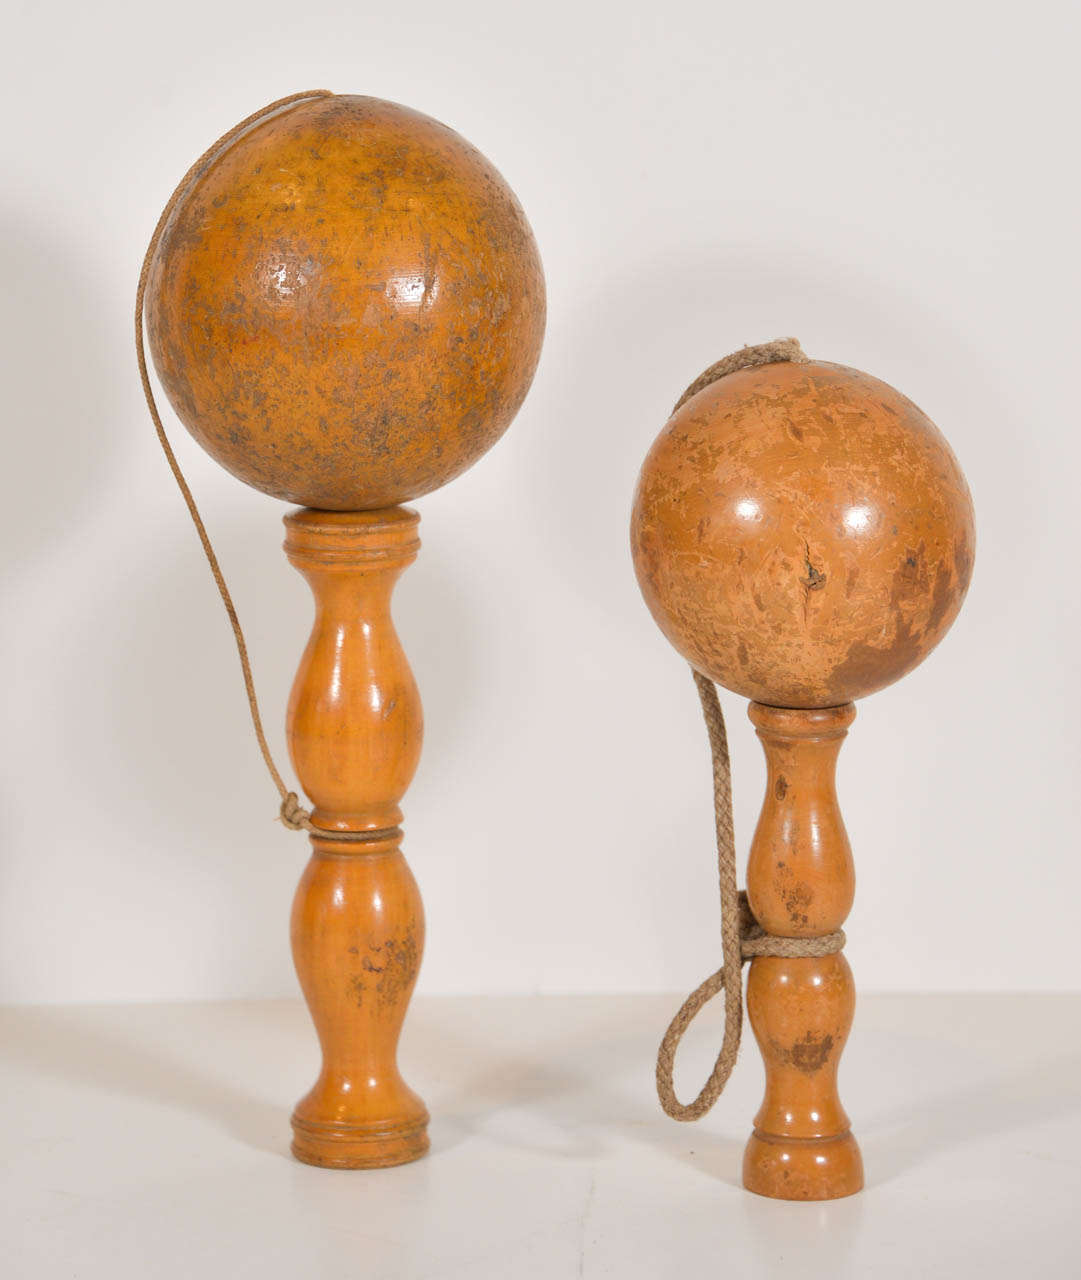 19th century Belgium hand-carved child's toy. the wooden ball is attached to the base with a woven string. The child would toss the ball off the base and try to catch it back on the base. The wooden ball has a hole in the bottom and the stand has a